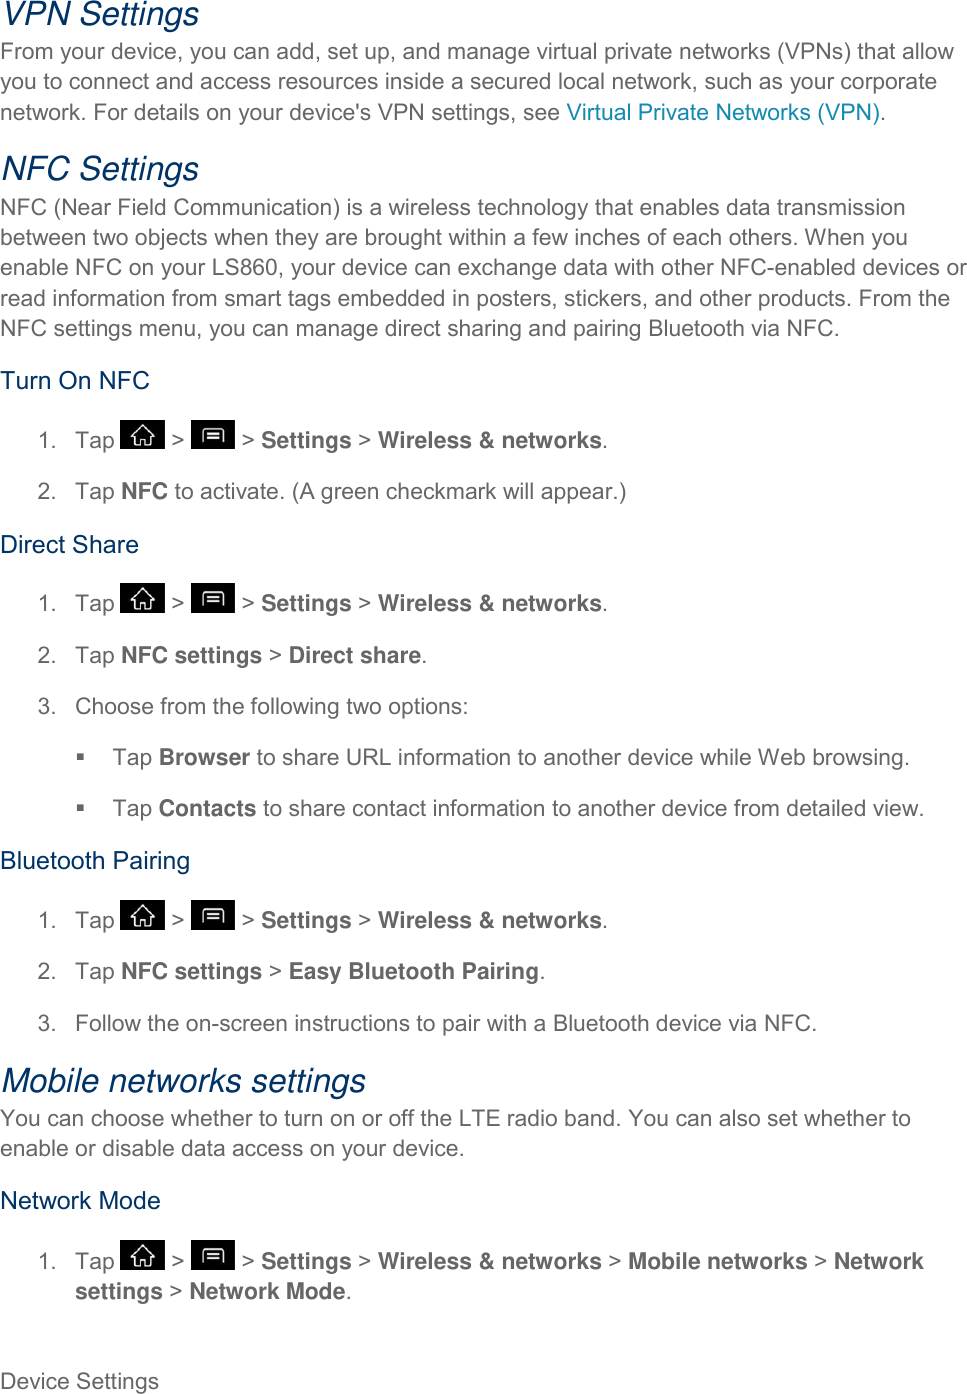 Device Settings     VPN Settings From your device, you can add, set up, and manage virtual private networks (VPNs) that allow you to connect and access resources inside a secured local network, such as your corporate network. For details on your device&apos;s VPN settings, see Virtual Private Networks (VPN). NFC Settings NFC (Near Field Communication) is a wireless technology that enables data transmission between two objects when they are brought within a few inches of each others. When you enable NFC on your LS860, your device can exchange data with other NFC-enabled devices or read information from smart tags embedded in posters, stickers, and other products. From the NFC settings menu, you can manage direct sharing and pairing Bluetooth via NFC. Turn On NFC 1.  Tap   &gt;   &gt; Settings &gt; Wireless &amp; networks. 2.  Tap NFC to activate. (A green checkmark will appear.) Direct Share 1.  Tap   &gt;   &gt; Settings &gt; Wireless &amp; networks. 2.  Tap NFC settings &gt; Direct share. 3.  Choose from the following two options:   Tap Browser to share URL information to another device while Web browsing.   Tap Contacts to share contact information to another device from detailed view. Bluetooth Pairing 1.  Tap   &gt;   &gt; Settings &gt; Wireless &amp; networks. 2.  Tap NFC settings &gt; Easy Bluetooth Pairing. 3.  Follow the on-screen instructions to pair with a Bluetooth device via NFC. Mobile networks settings You can choose whether to turn on or off the LTE radio band. You can also set whether to enable or disable data access on your device. Network Mode 1.  Tap   &gt;   &gt; Settings &gt; Wireless &amp; networks &gt; Mobile networks &gt; Network settings &gt; Network Mode.  